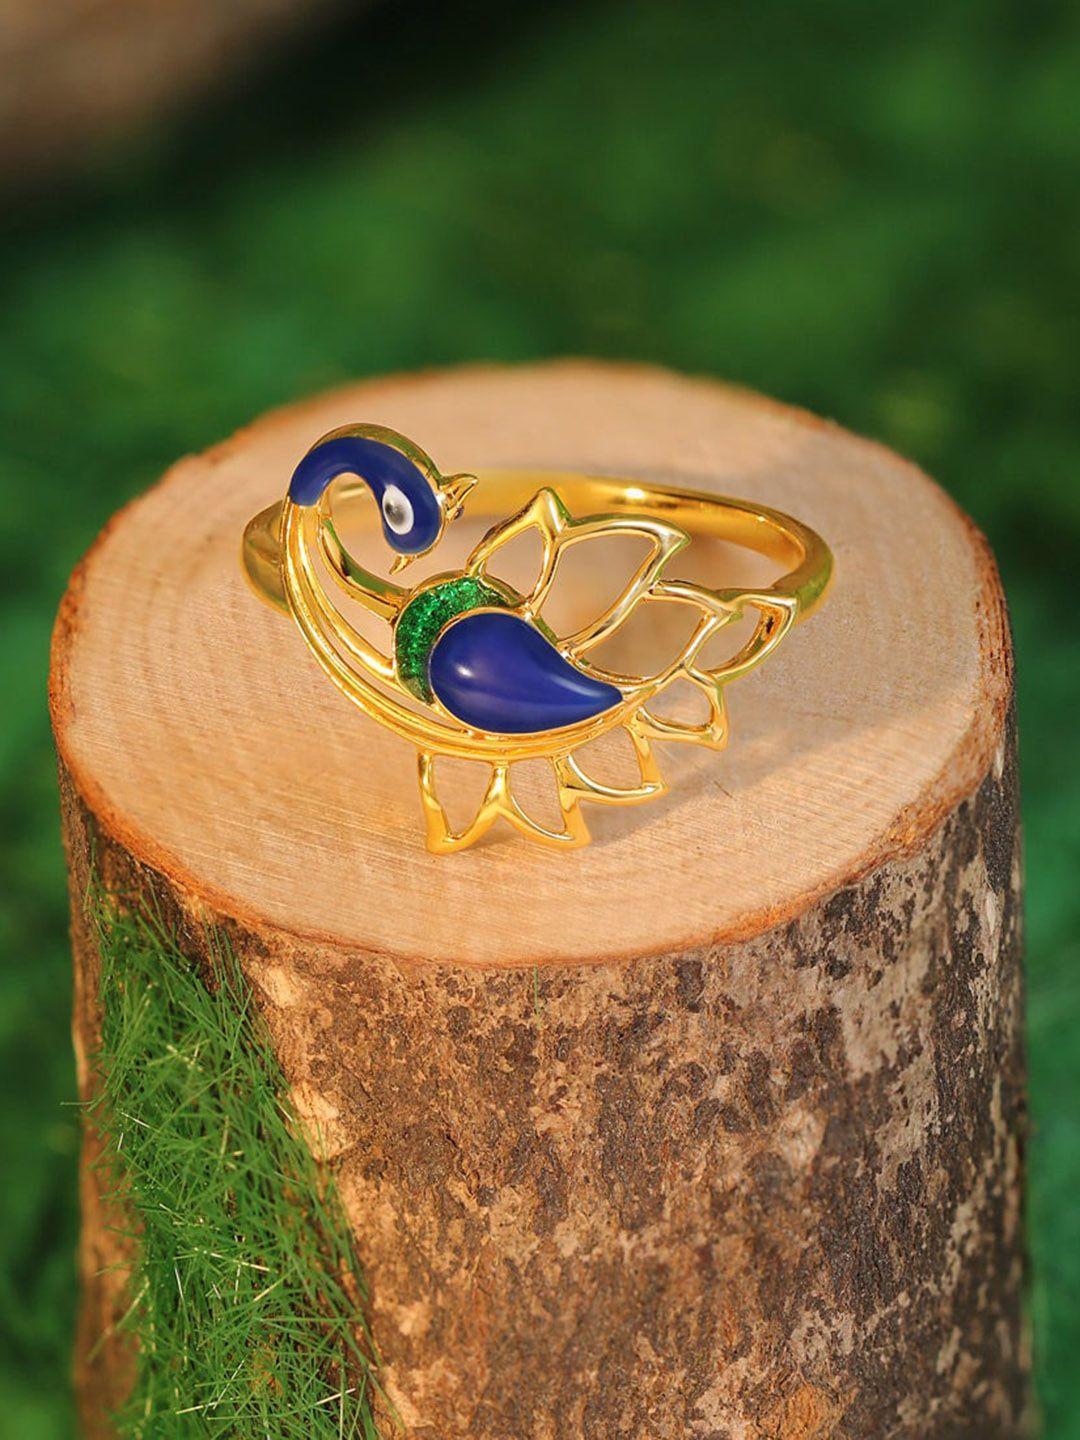 candere a kalyan jewellers company peacock 14kt bis hallmark gold ring-1.94gm